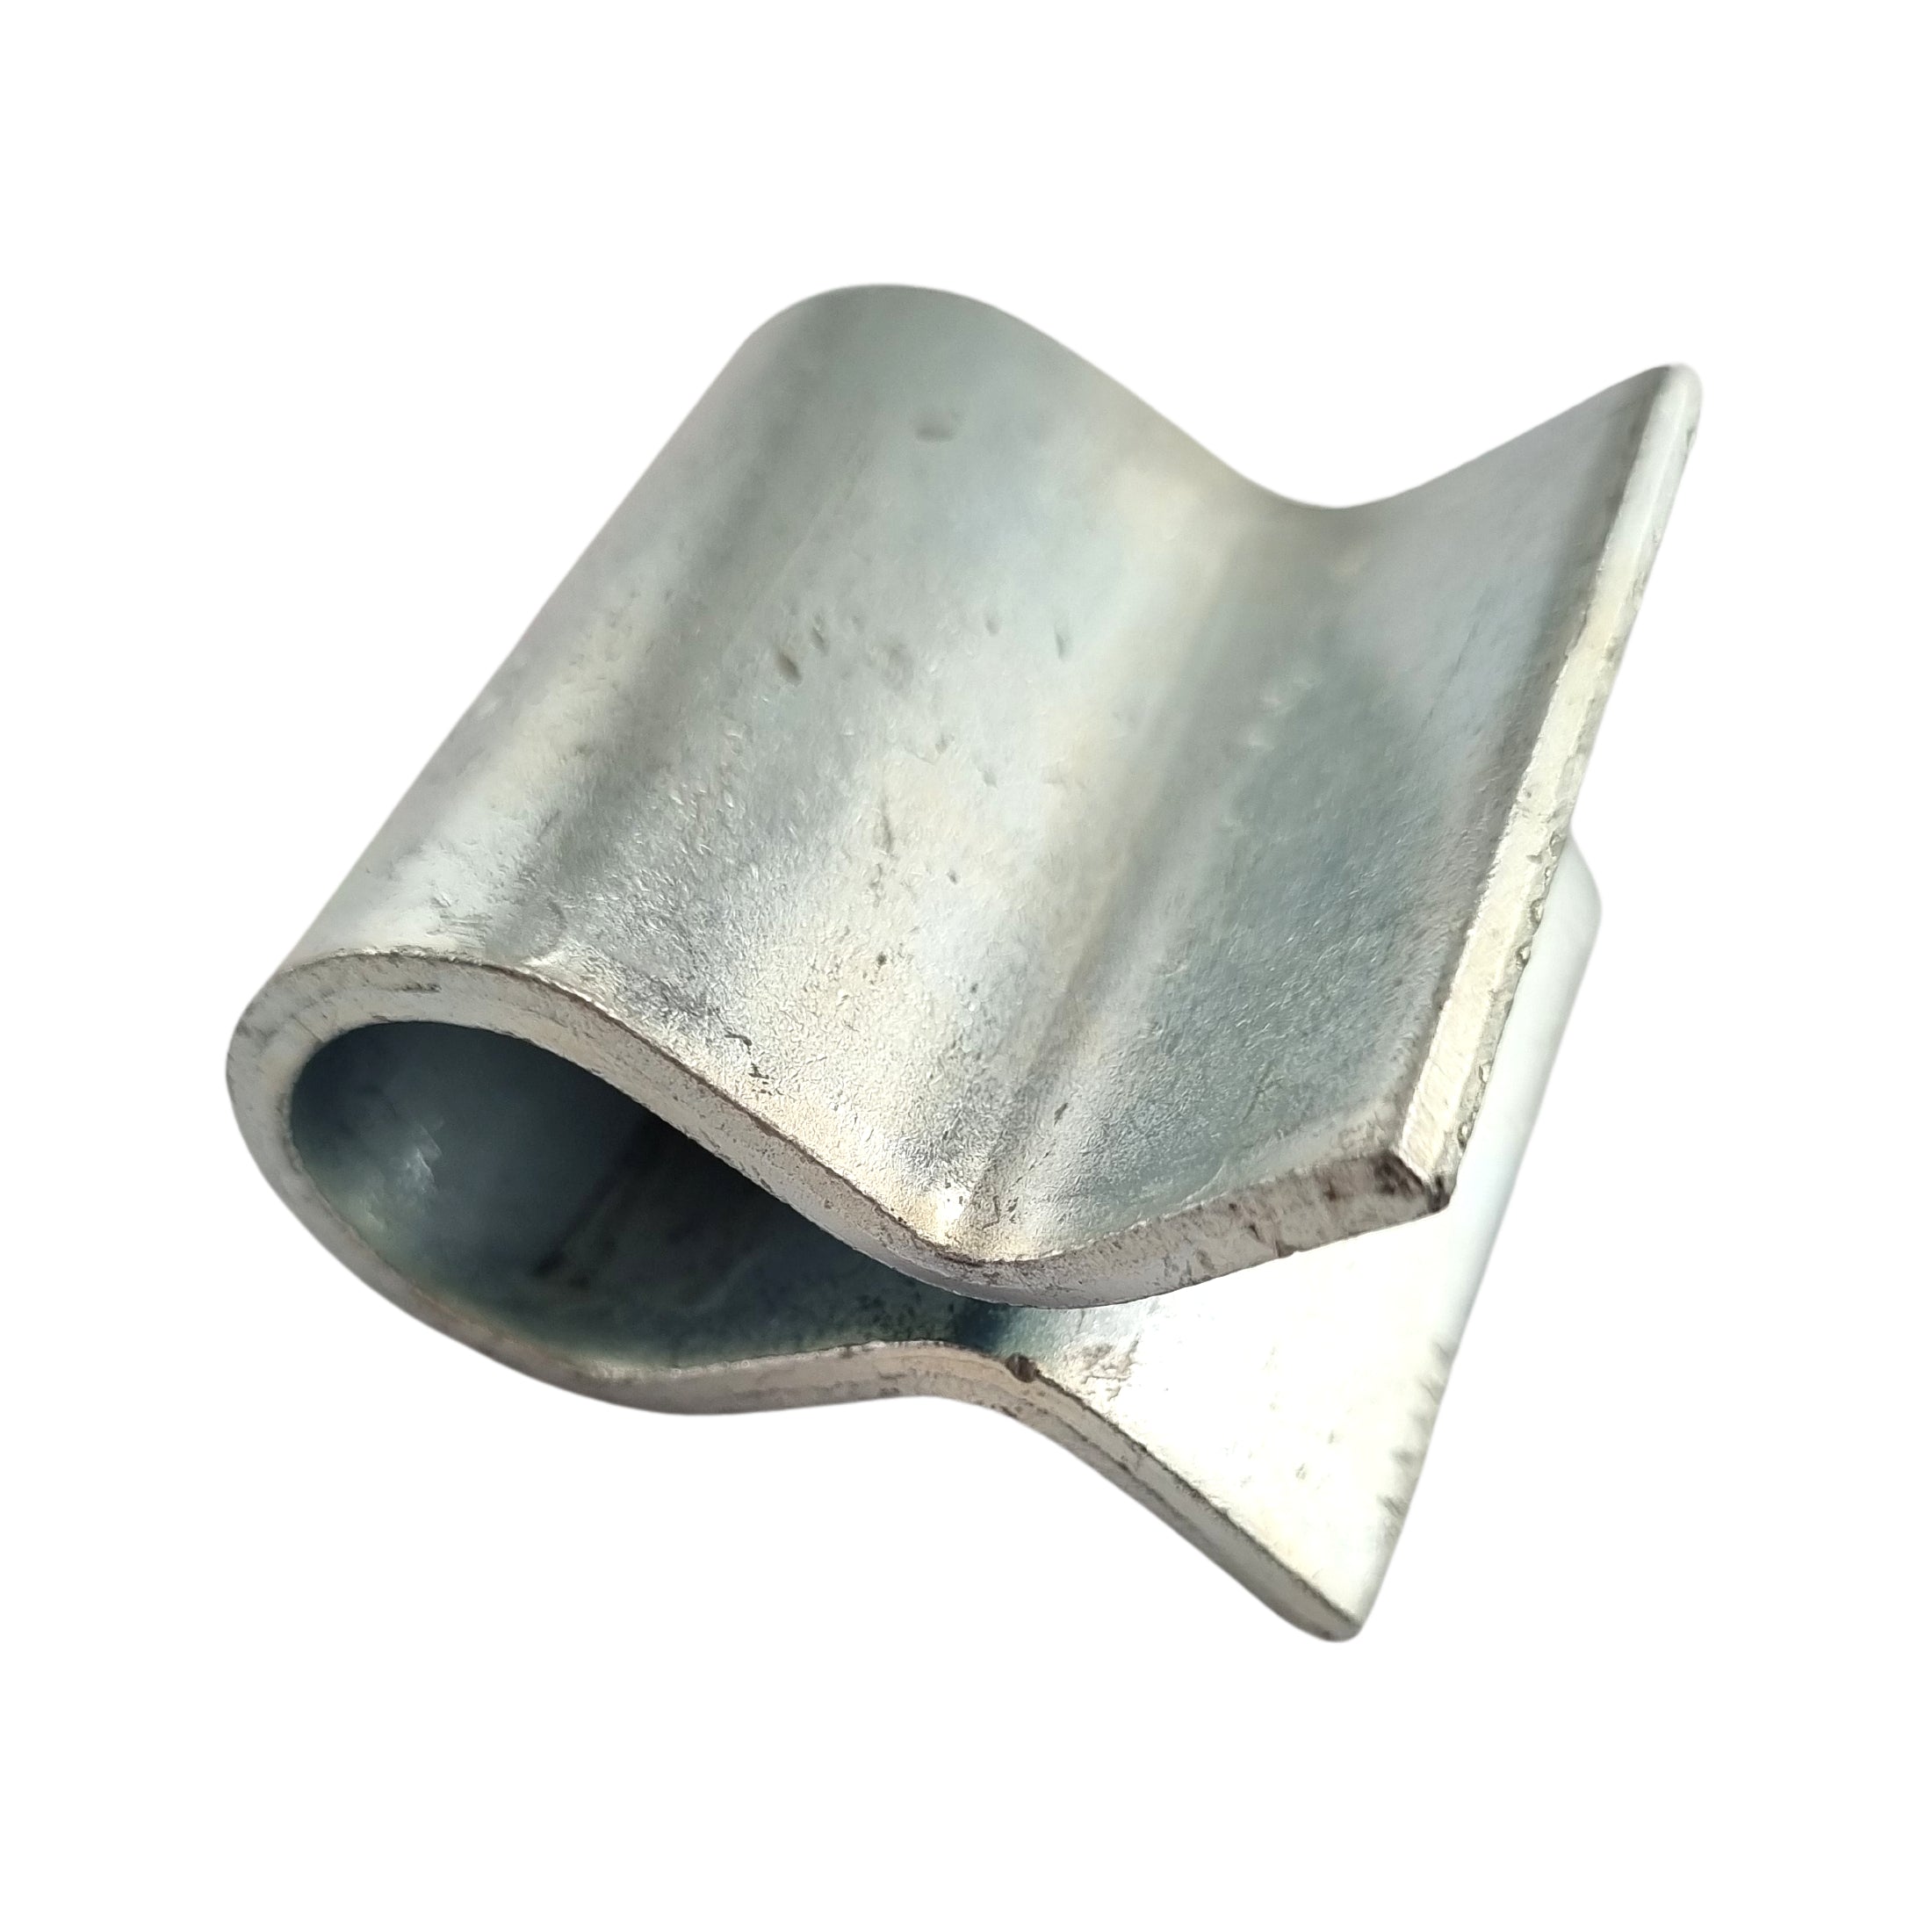 Weld On Socket - Zinc Plated. Australian made. Shop fence and gate fittings online. Chain.com.au. Australia wide shipping.